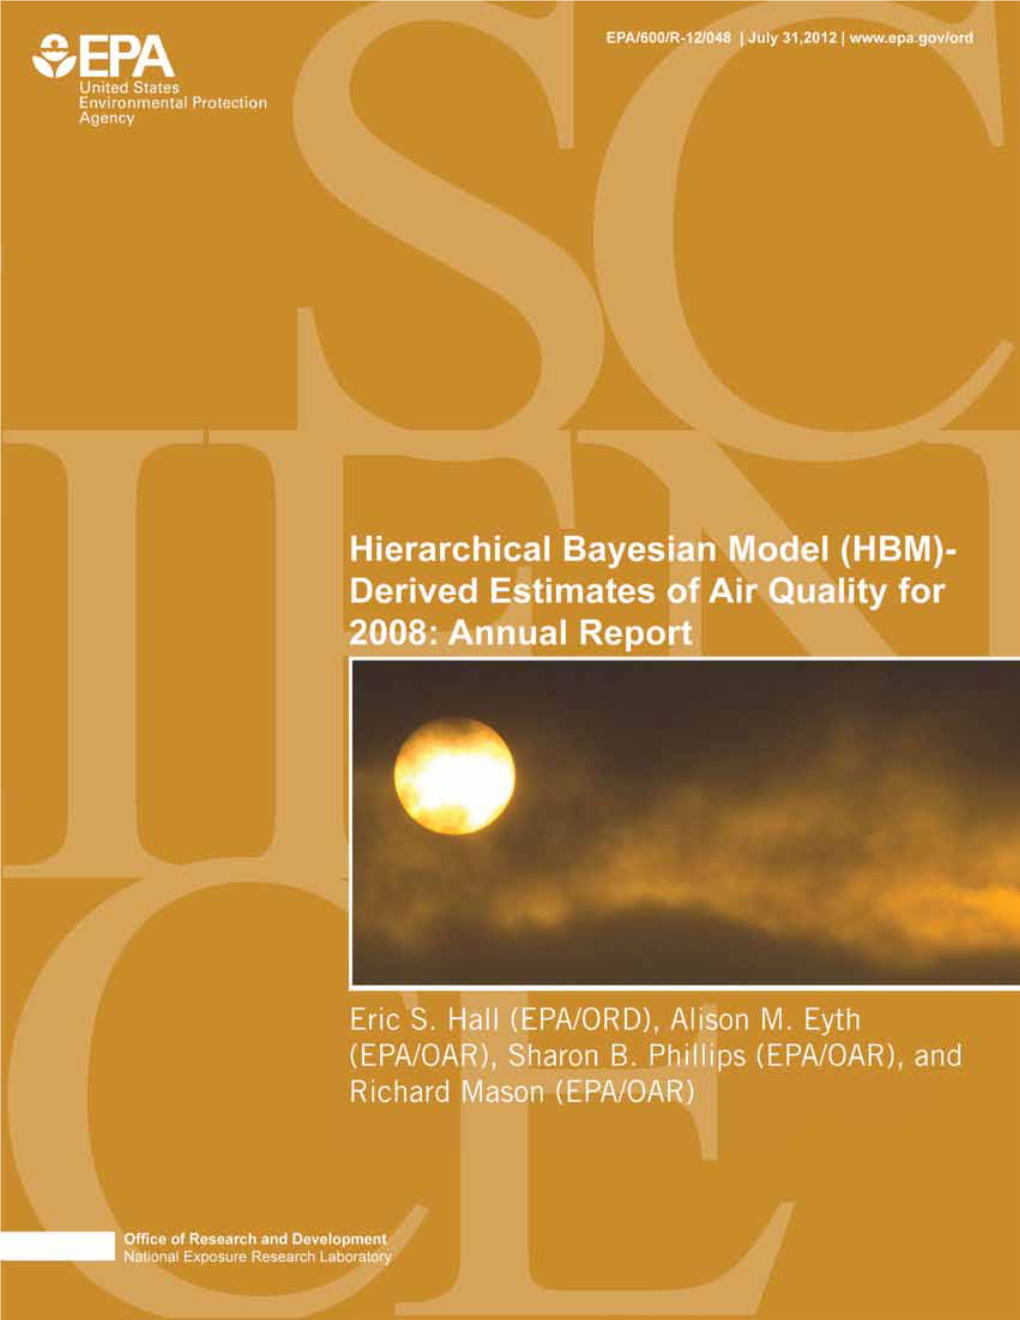 Hierarchical Bayesian Model (HBM)- Derived Estimates of Air Quality for 2008: Annual Report Developed by the U.S